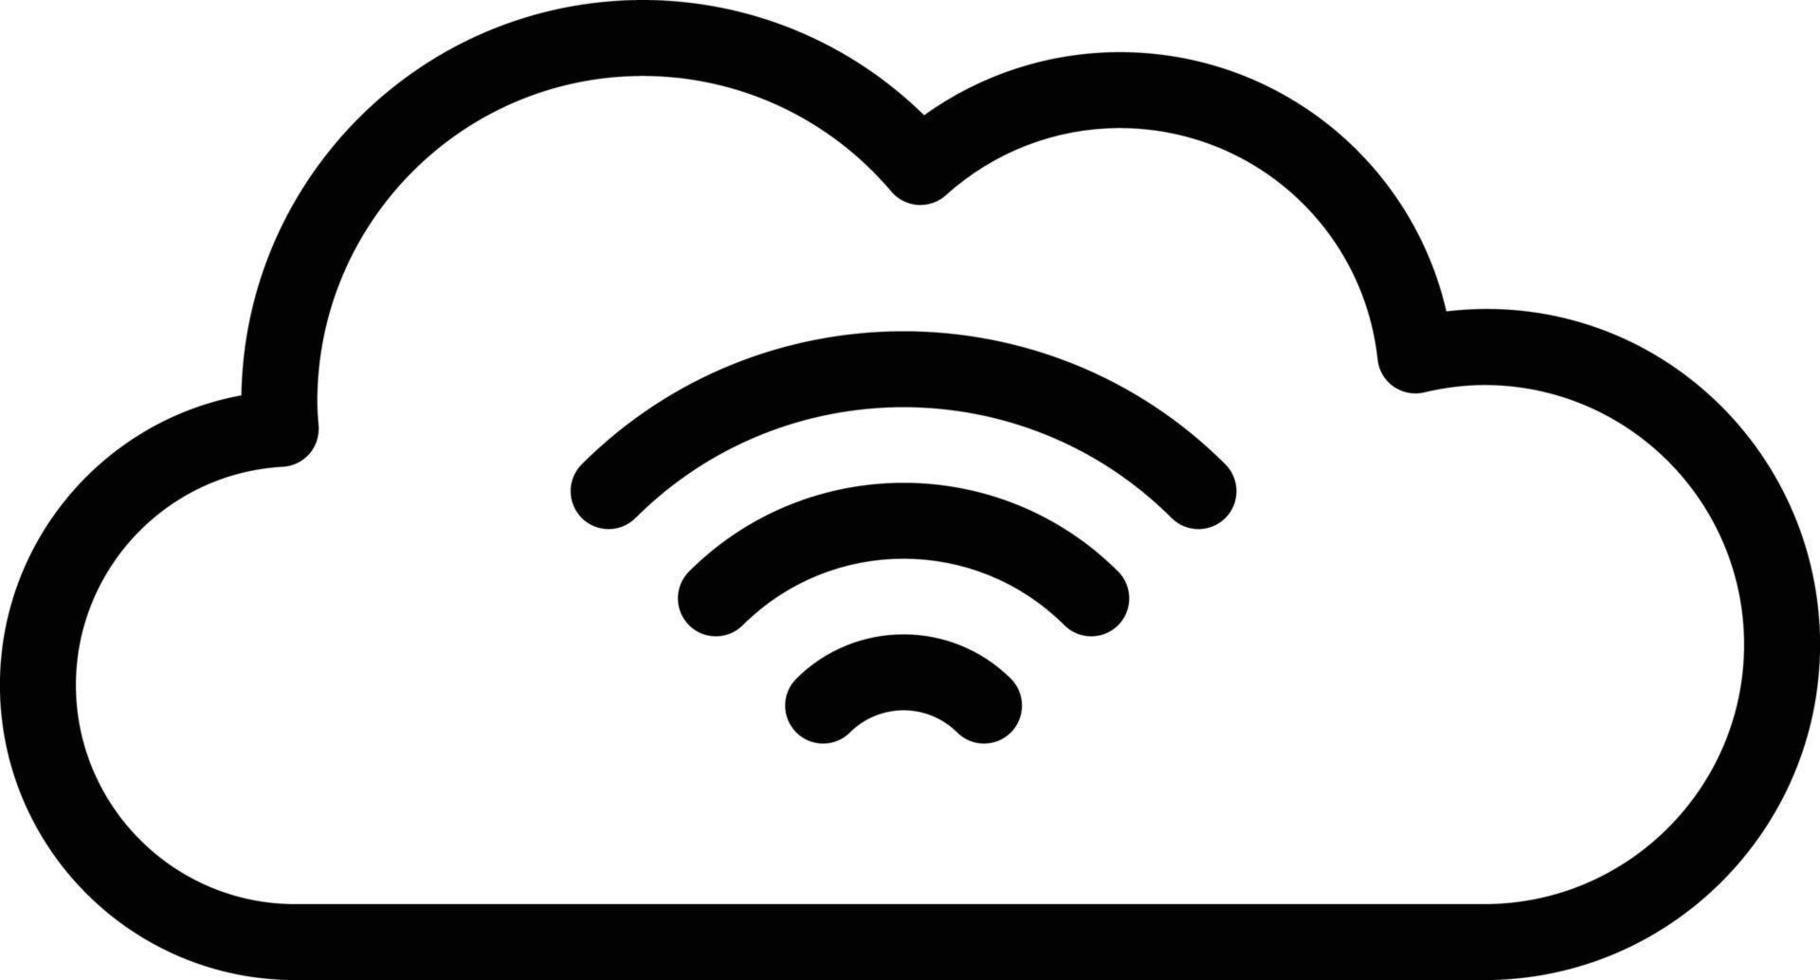 wifi vector illustration on a background.Premium quality symbols.vector icons for concept and graphic design.